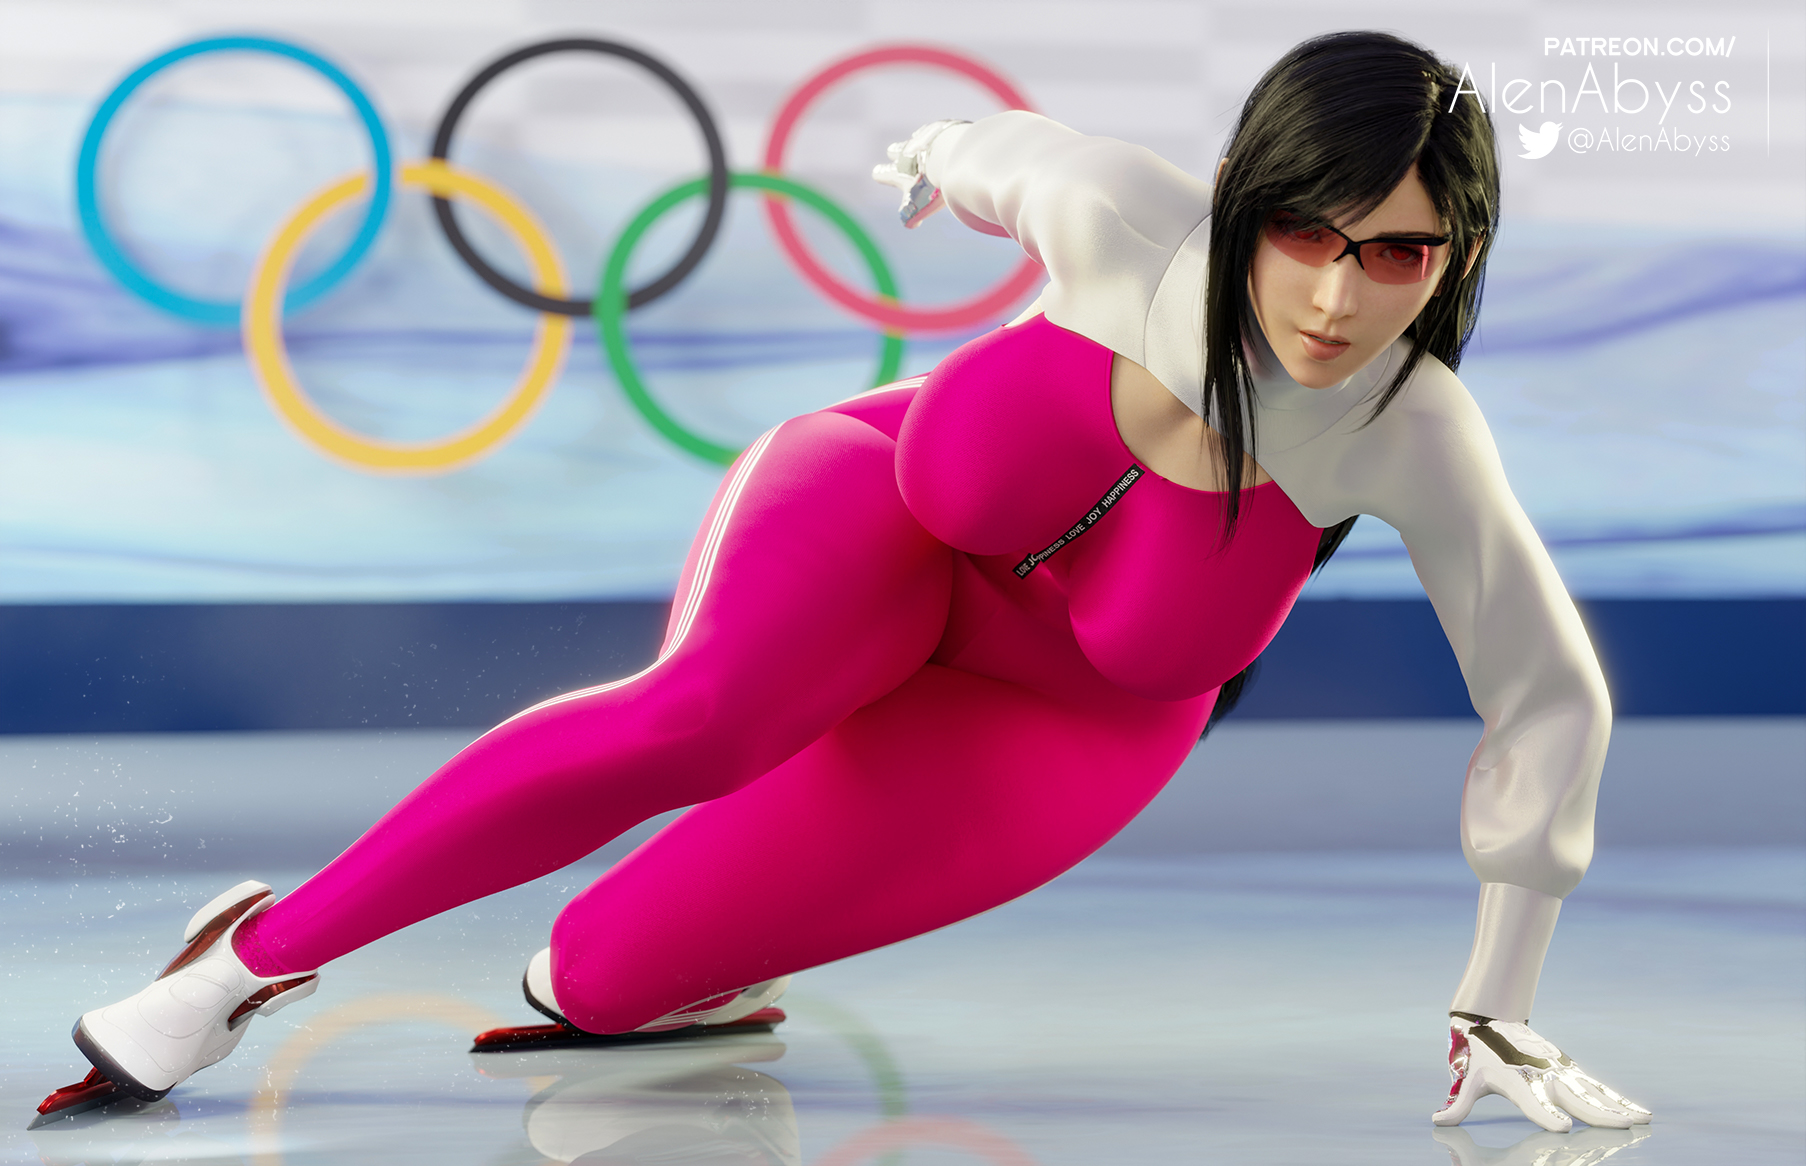 Intersport's Ultimate Athlete Fantasy Gallery: The Olympics of Erotica